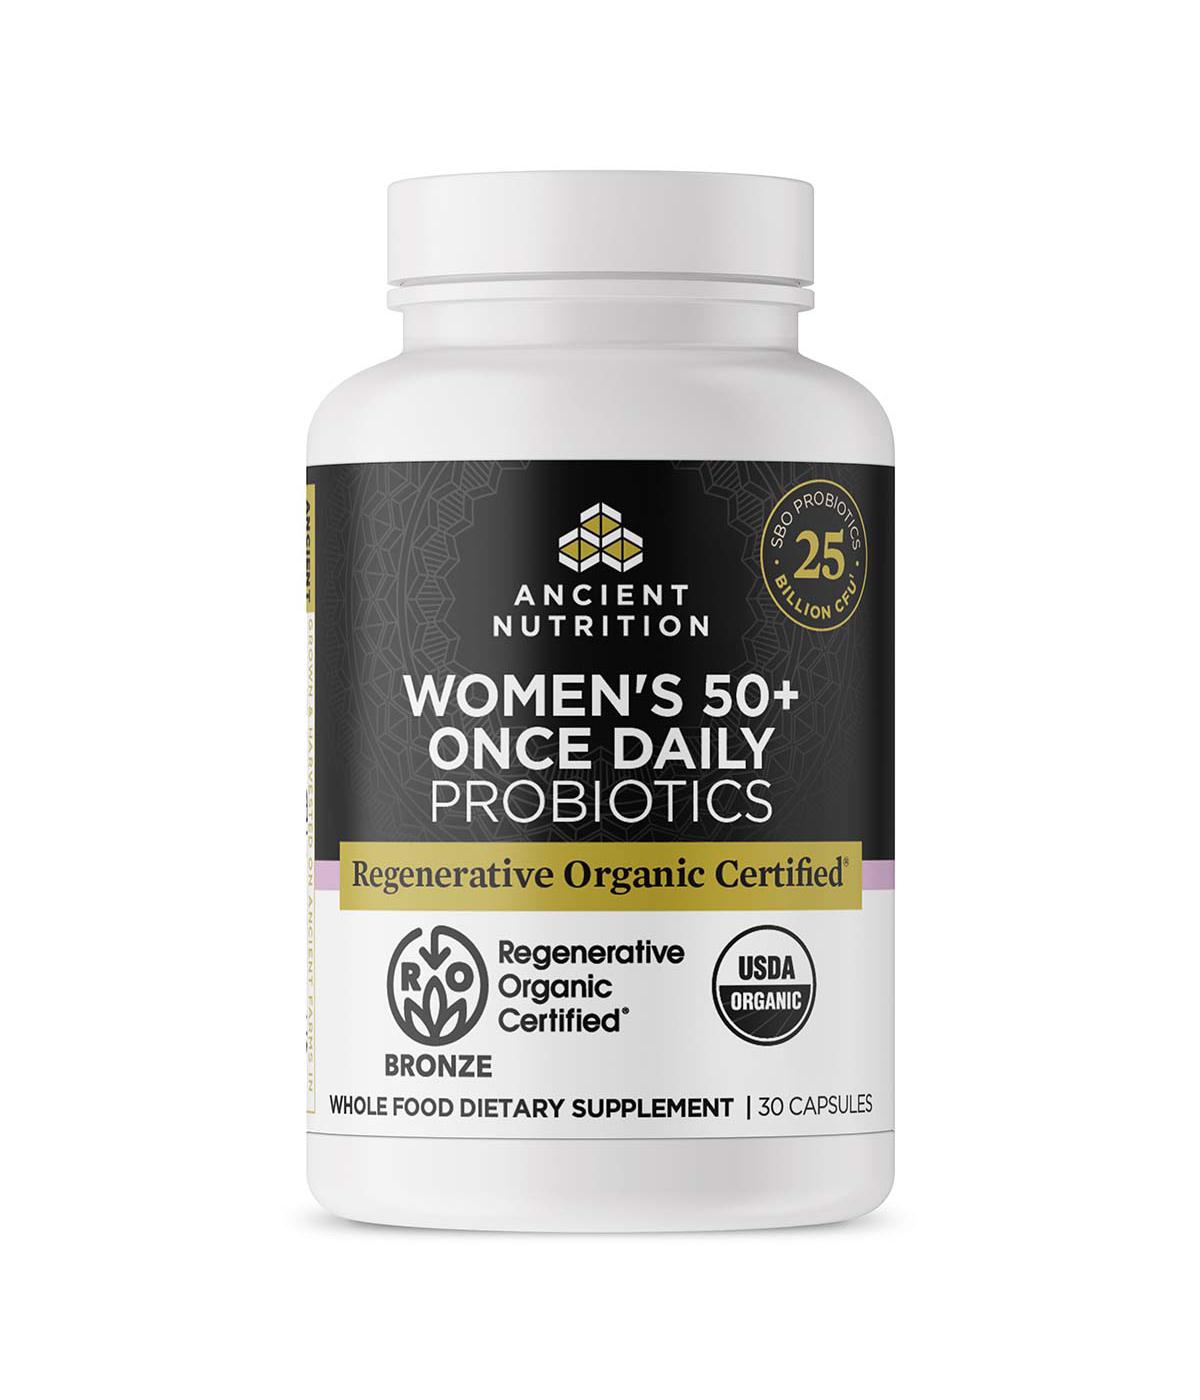 Ancient Nutrition Women's 50+ Once Daily Probiotics Capsules; image 2 of 4